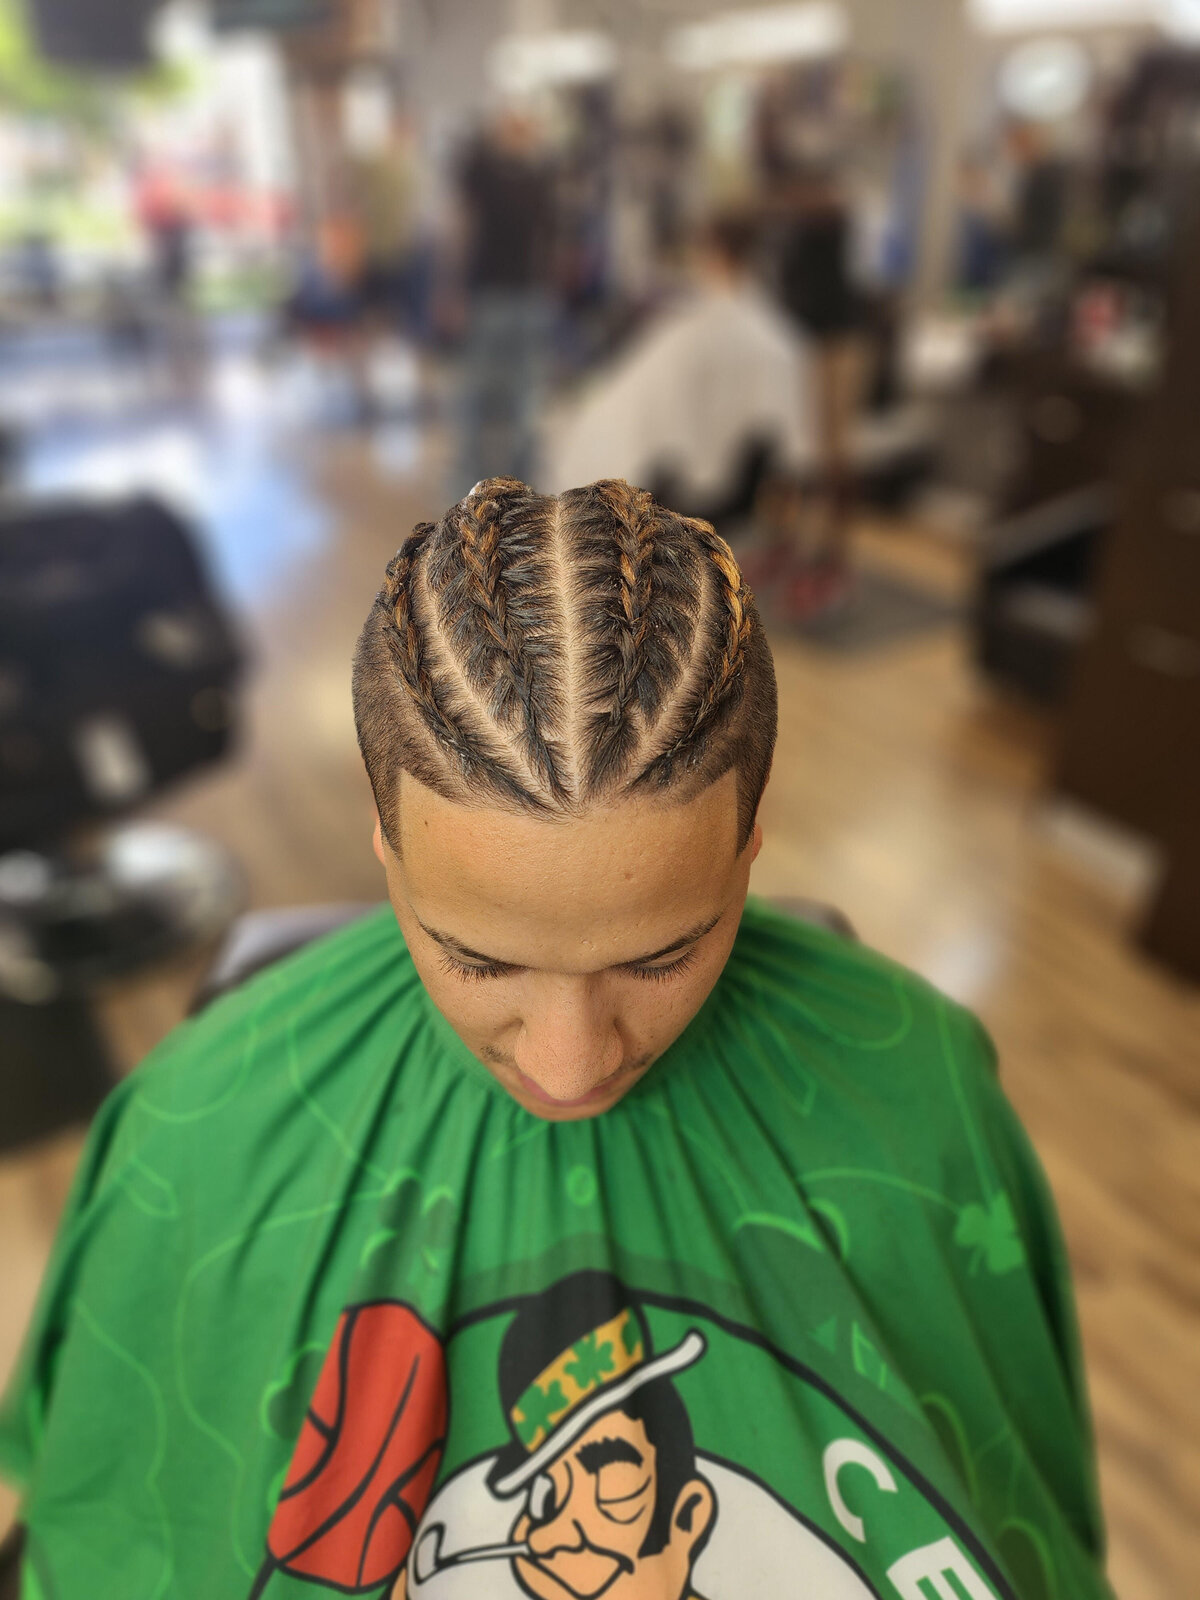 Whos Your Barber - Braid for Kids in Venice Florida